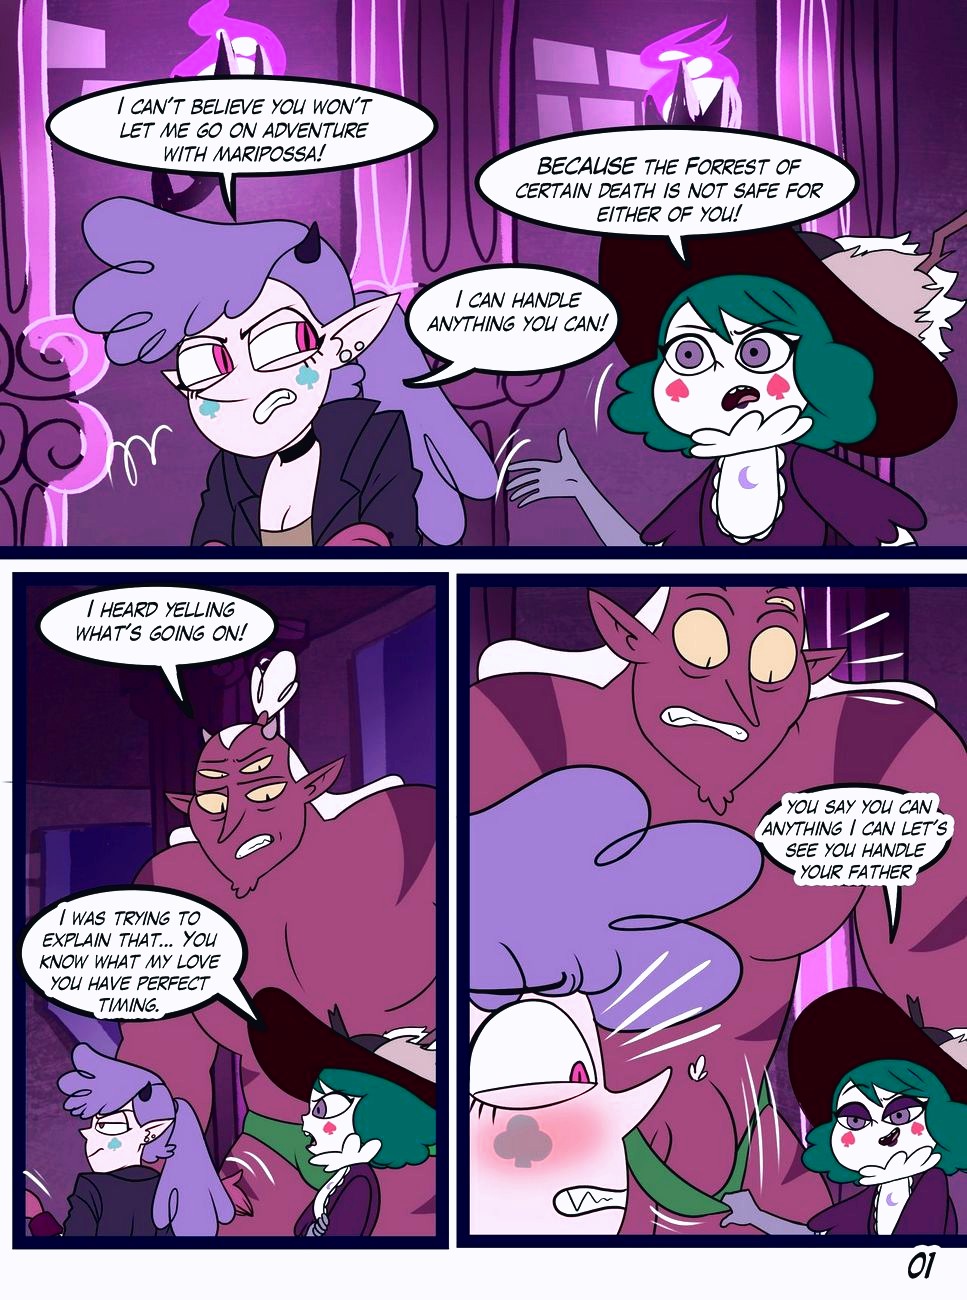 The Real Throne Of Mewni porn comic page 002